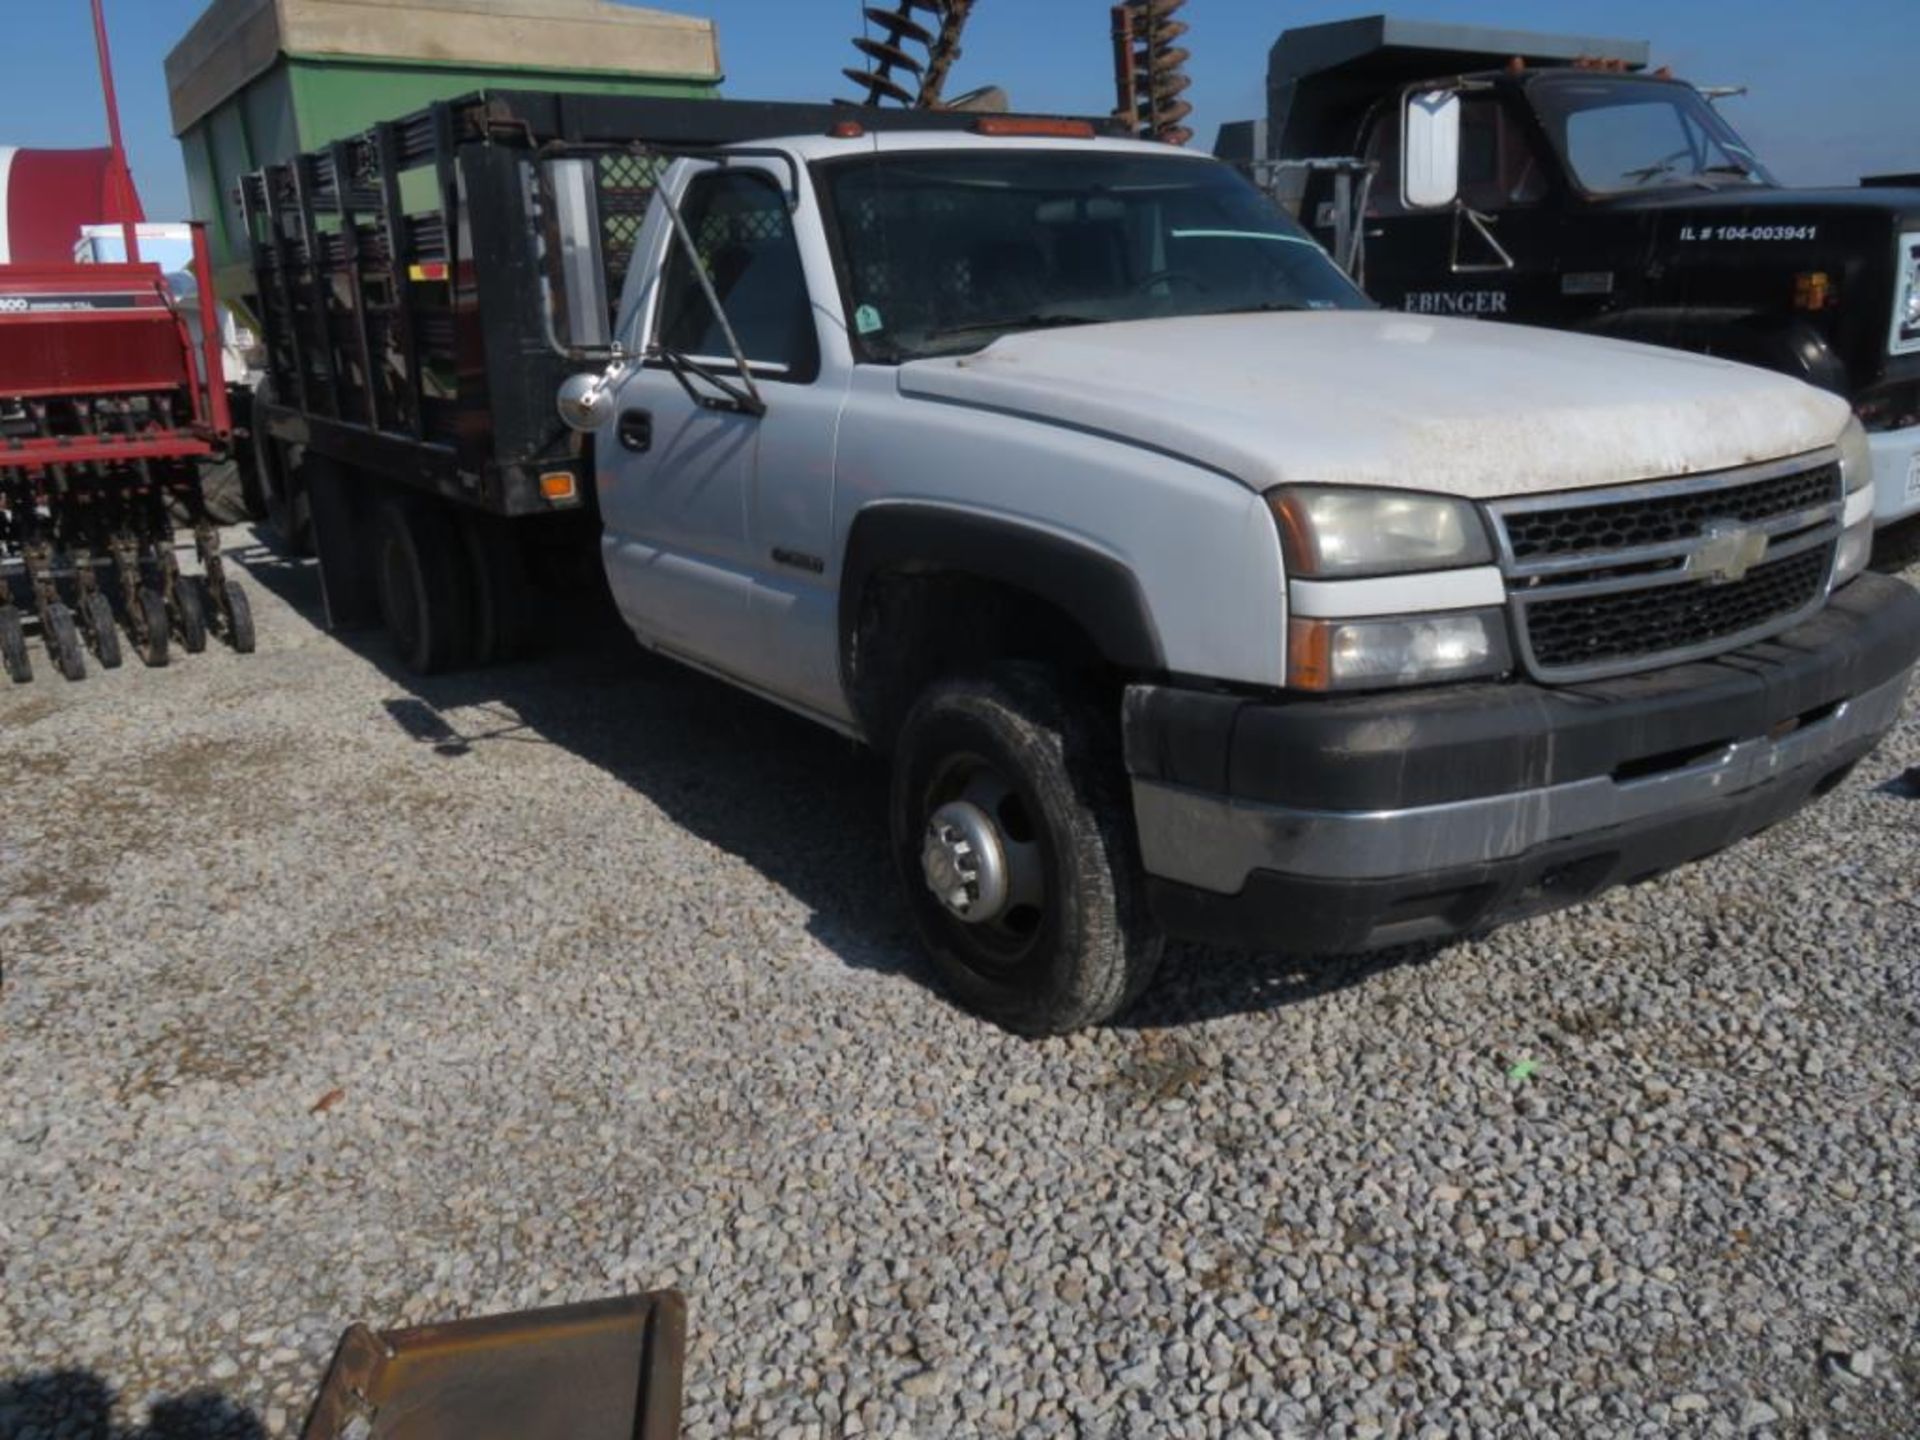 2007 Chevrolet flatbed (title) 3500 flatbed 539,000 miles - Image 3 of 4